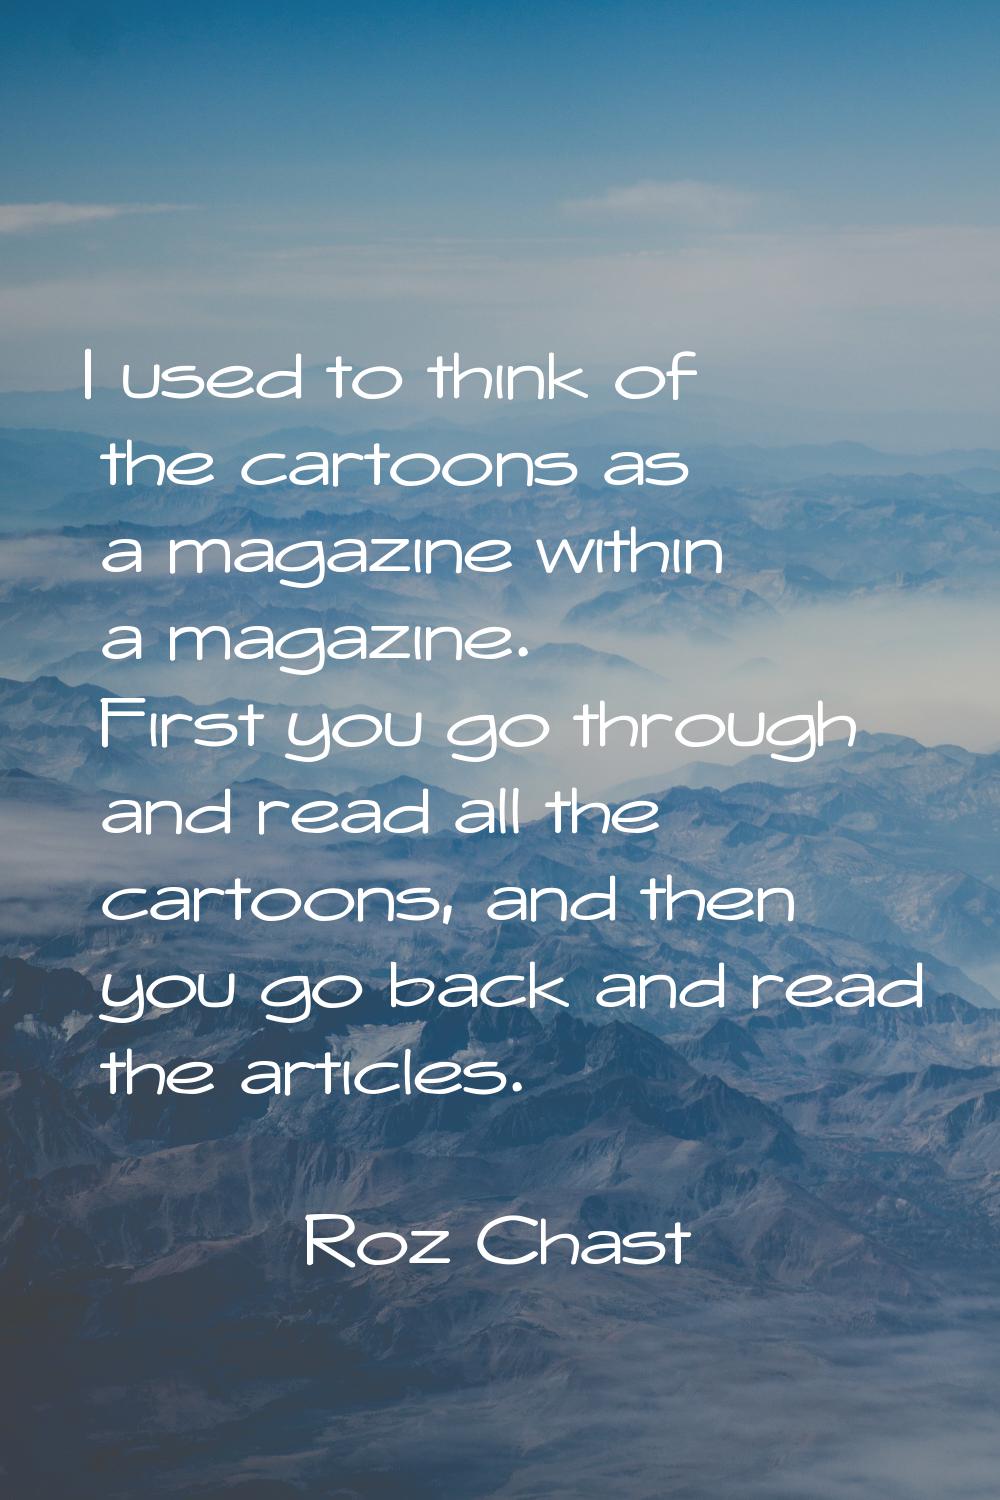 I used to think of the cartoons as a magazine within a magazine. First you go through and read all 